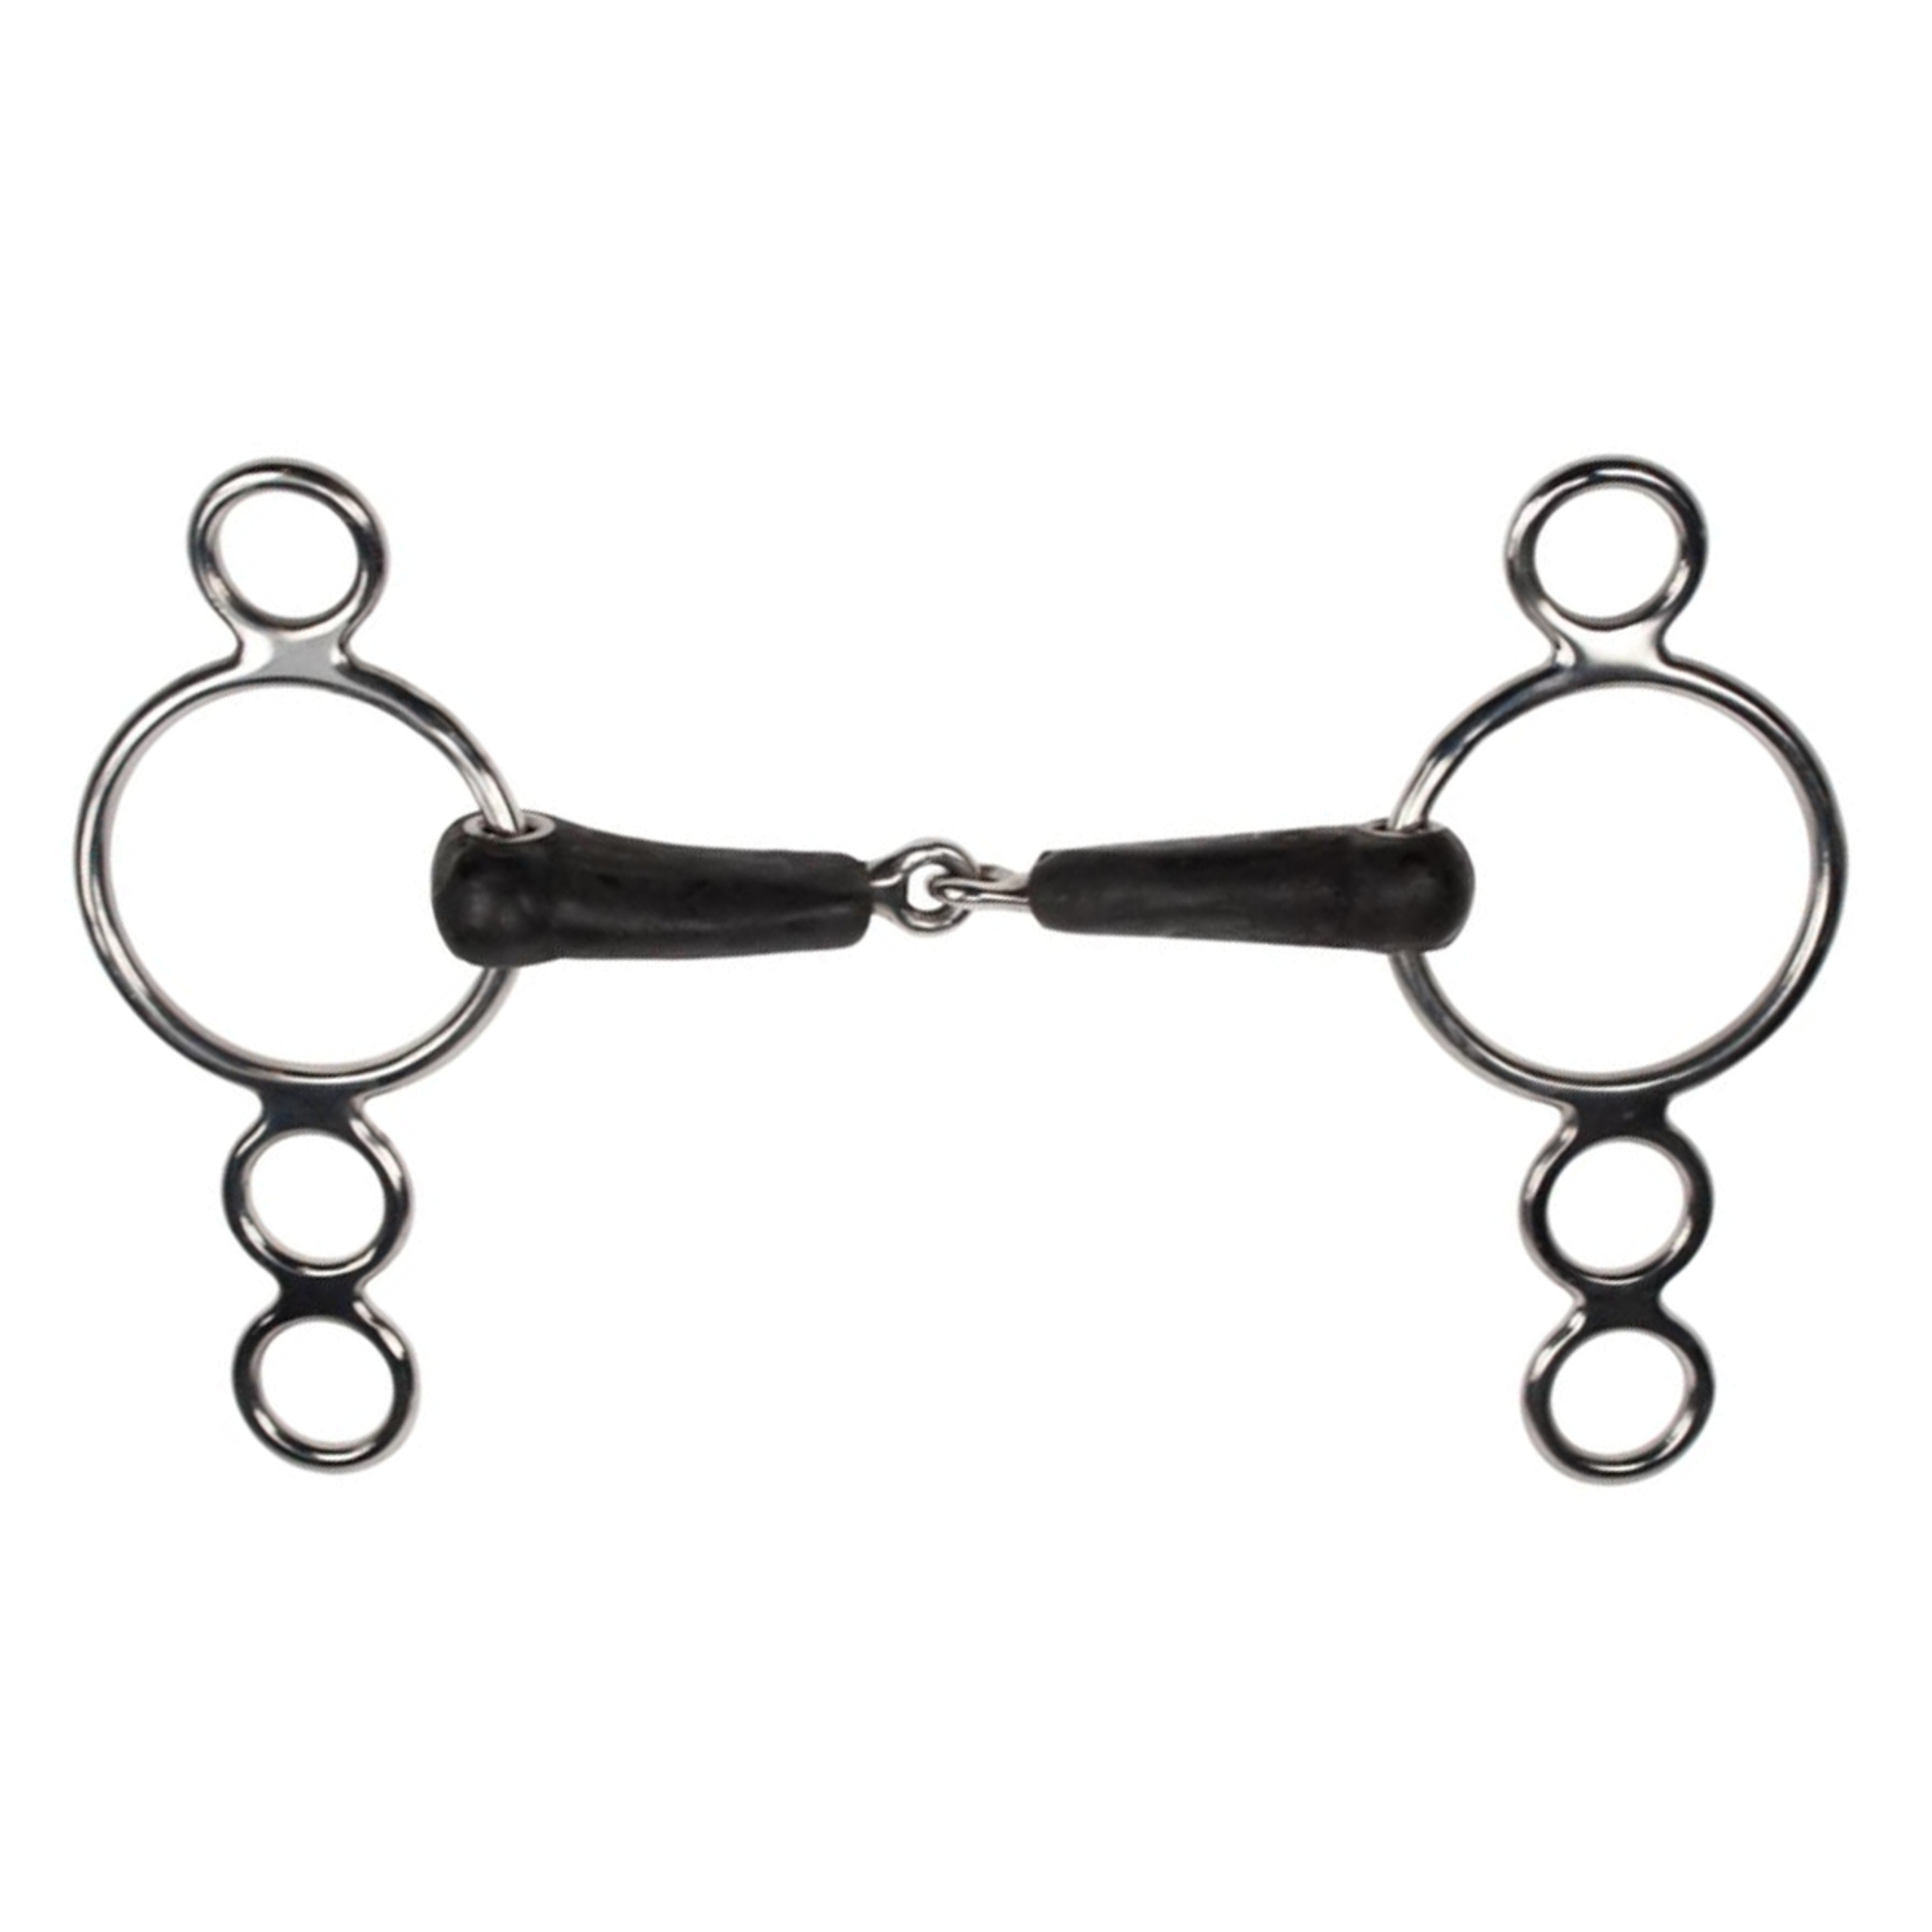 Abbey Bit 3-Ring Rubber Jointed